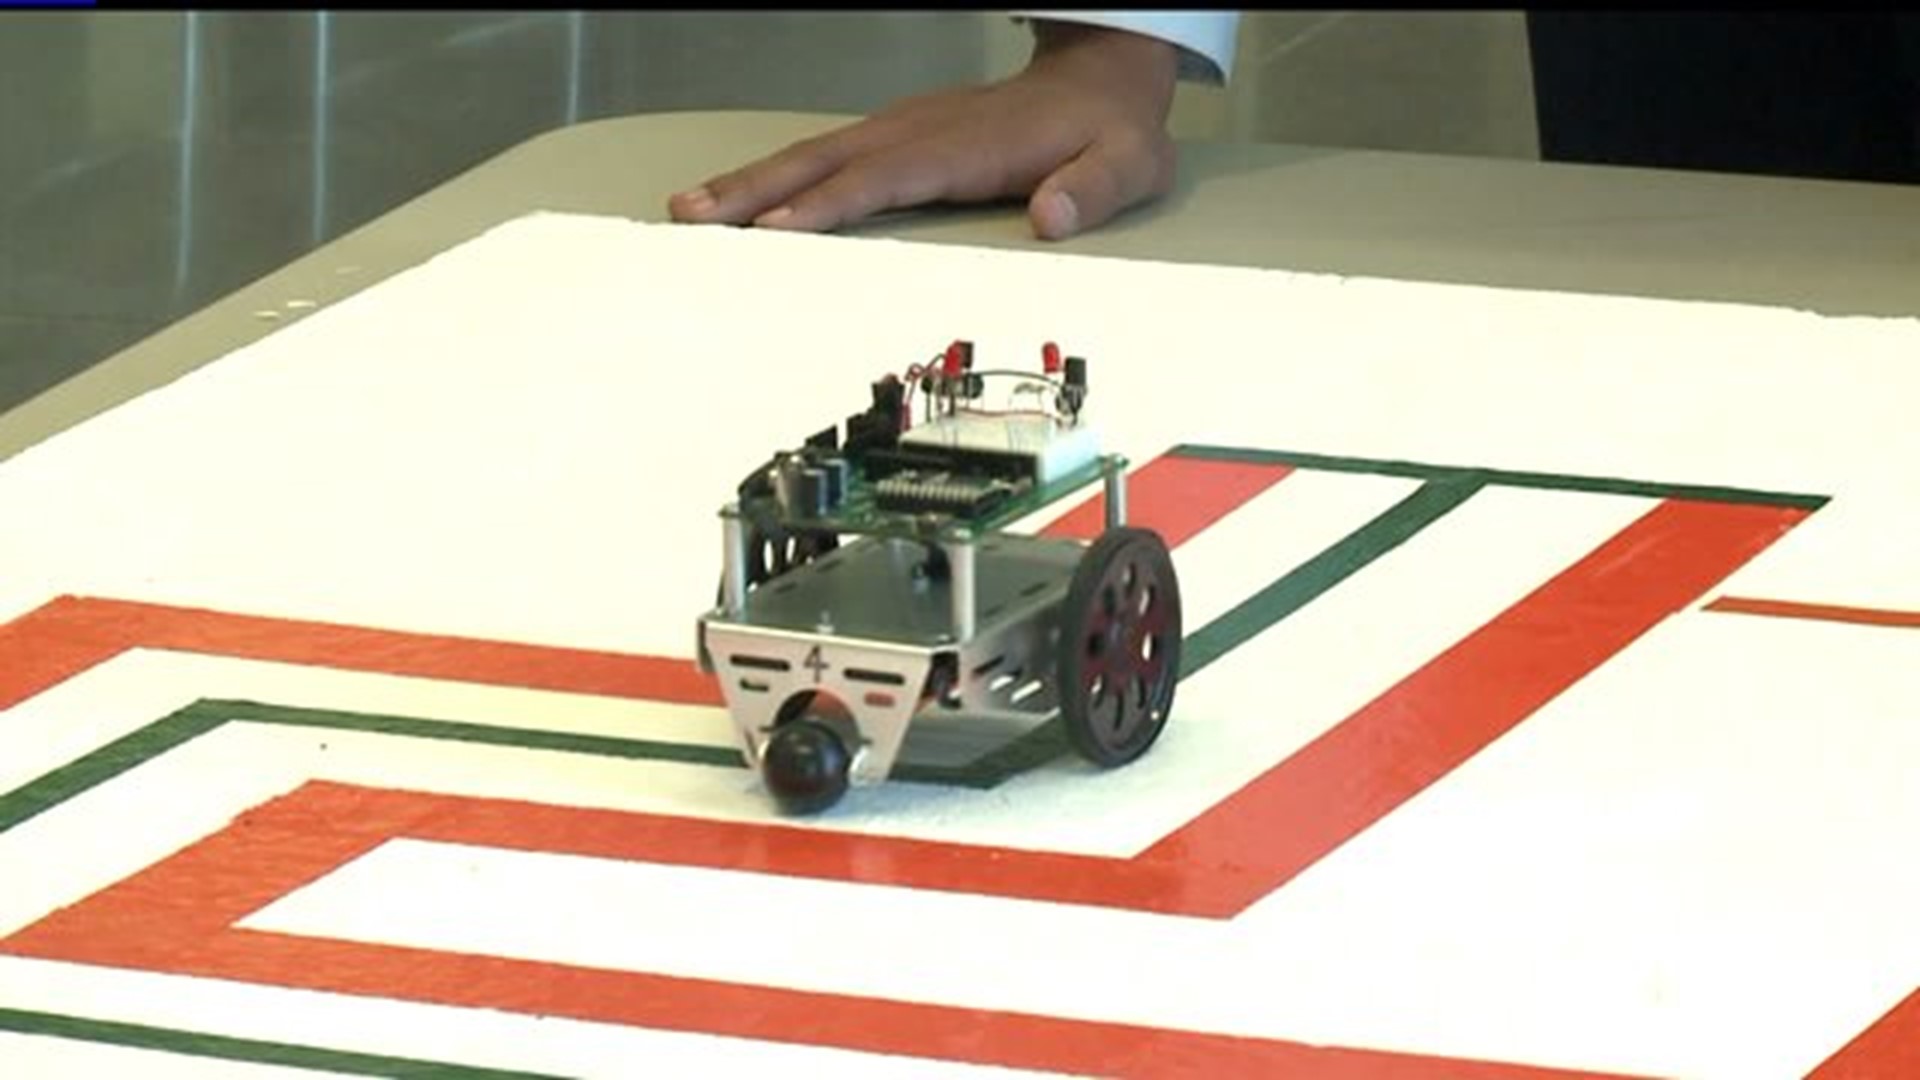 Robotics copetition held for area students